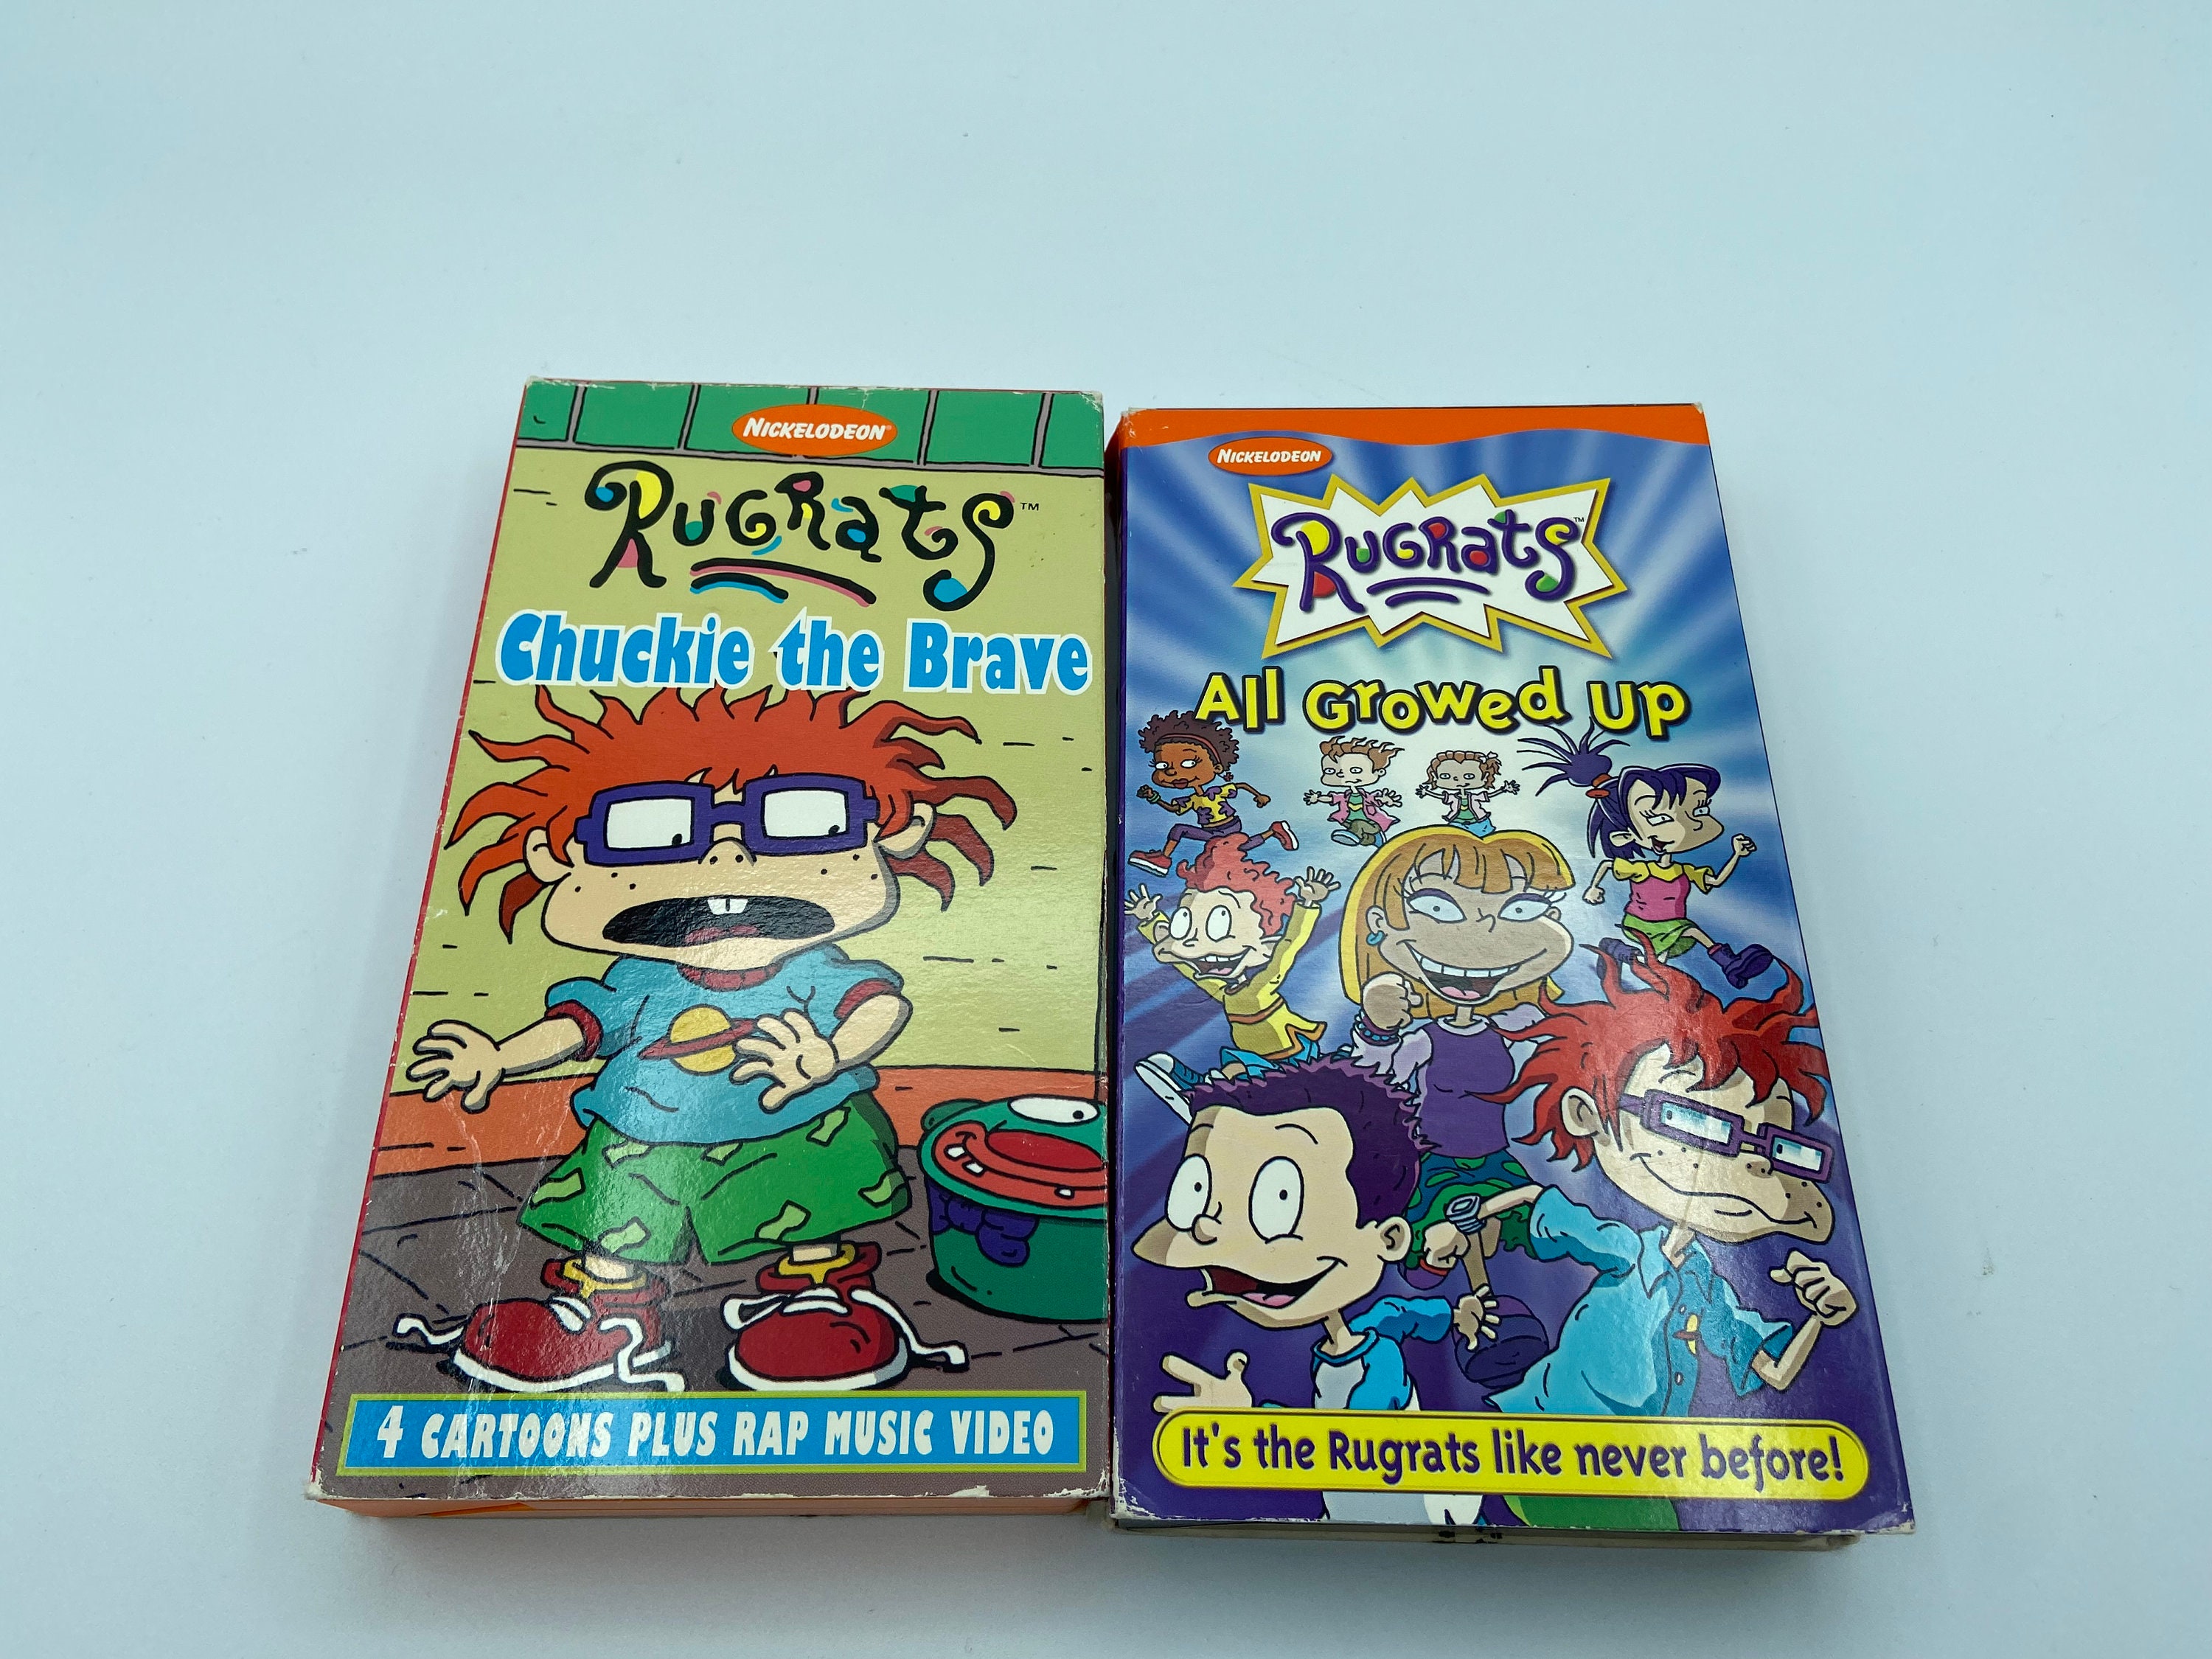 Rugrats: All Growed-Up (video game), Nickelodeon